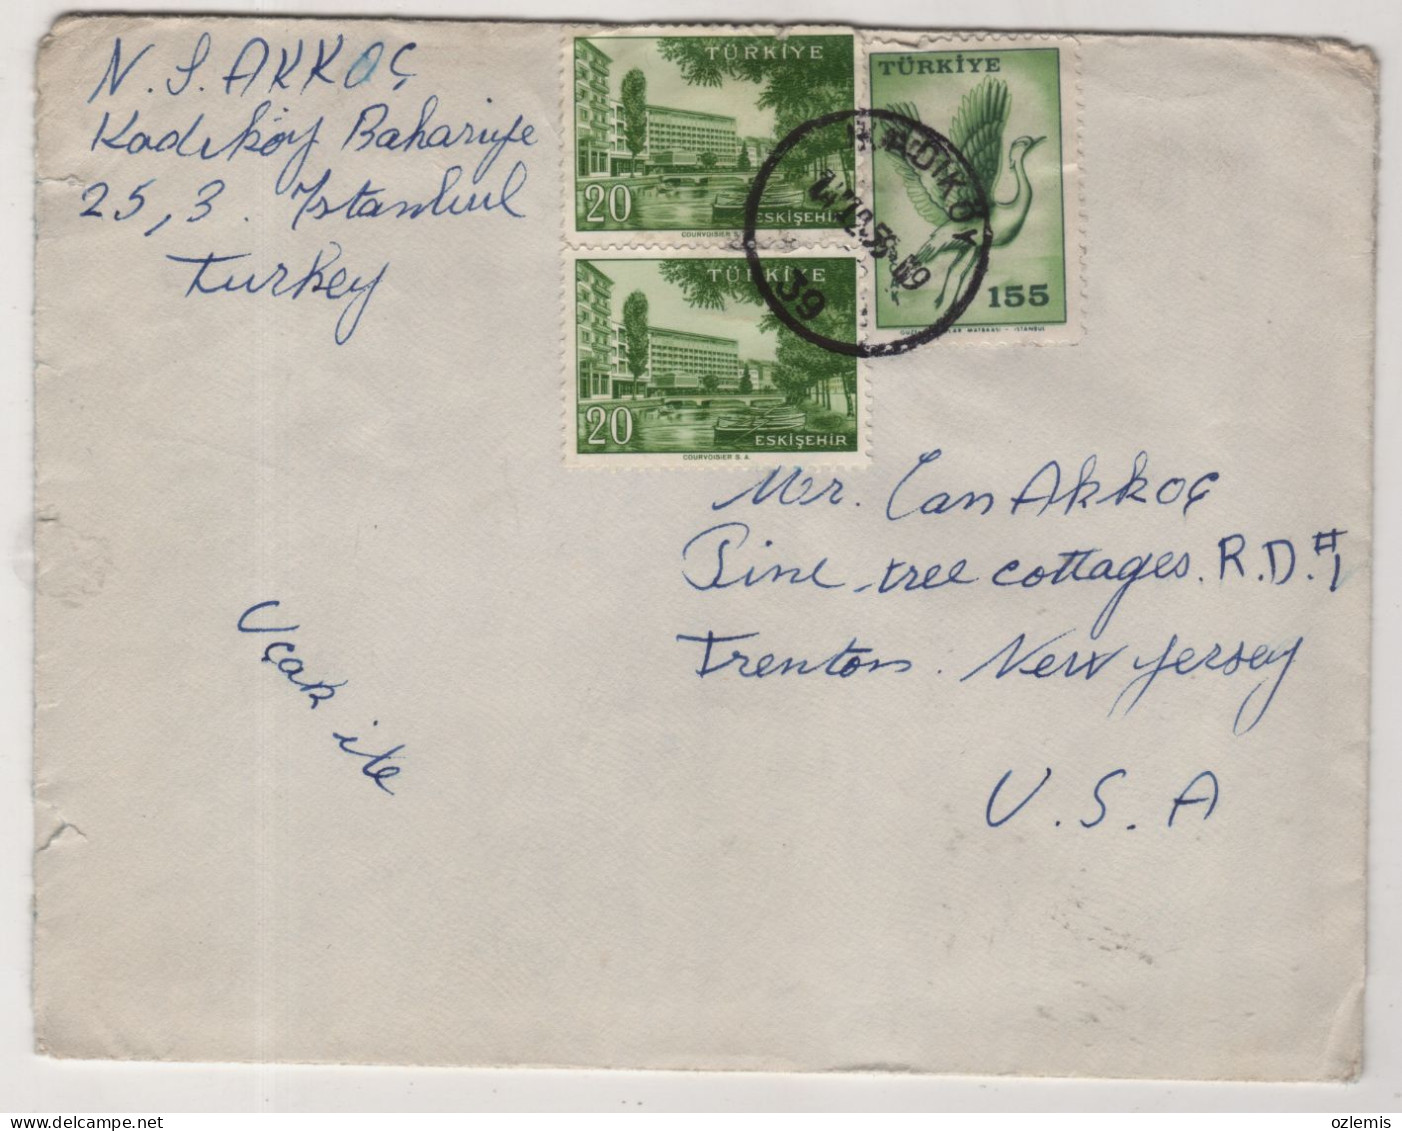 TURKEY,TURKEI,TURQUIE ,ISTANBUL TO USA.NEW JERSEY, ,1959 COVER - Lettres & Documents